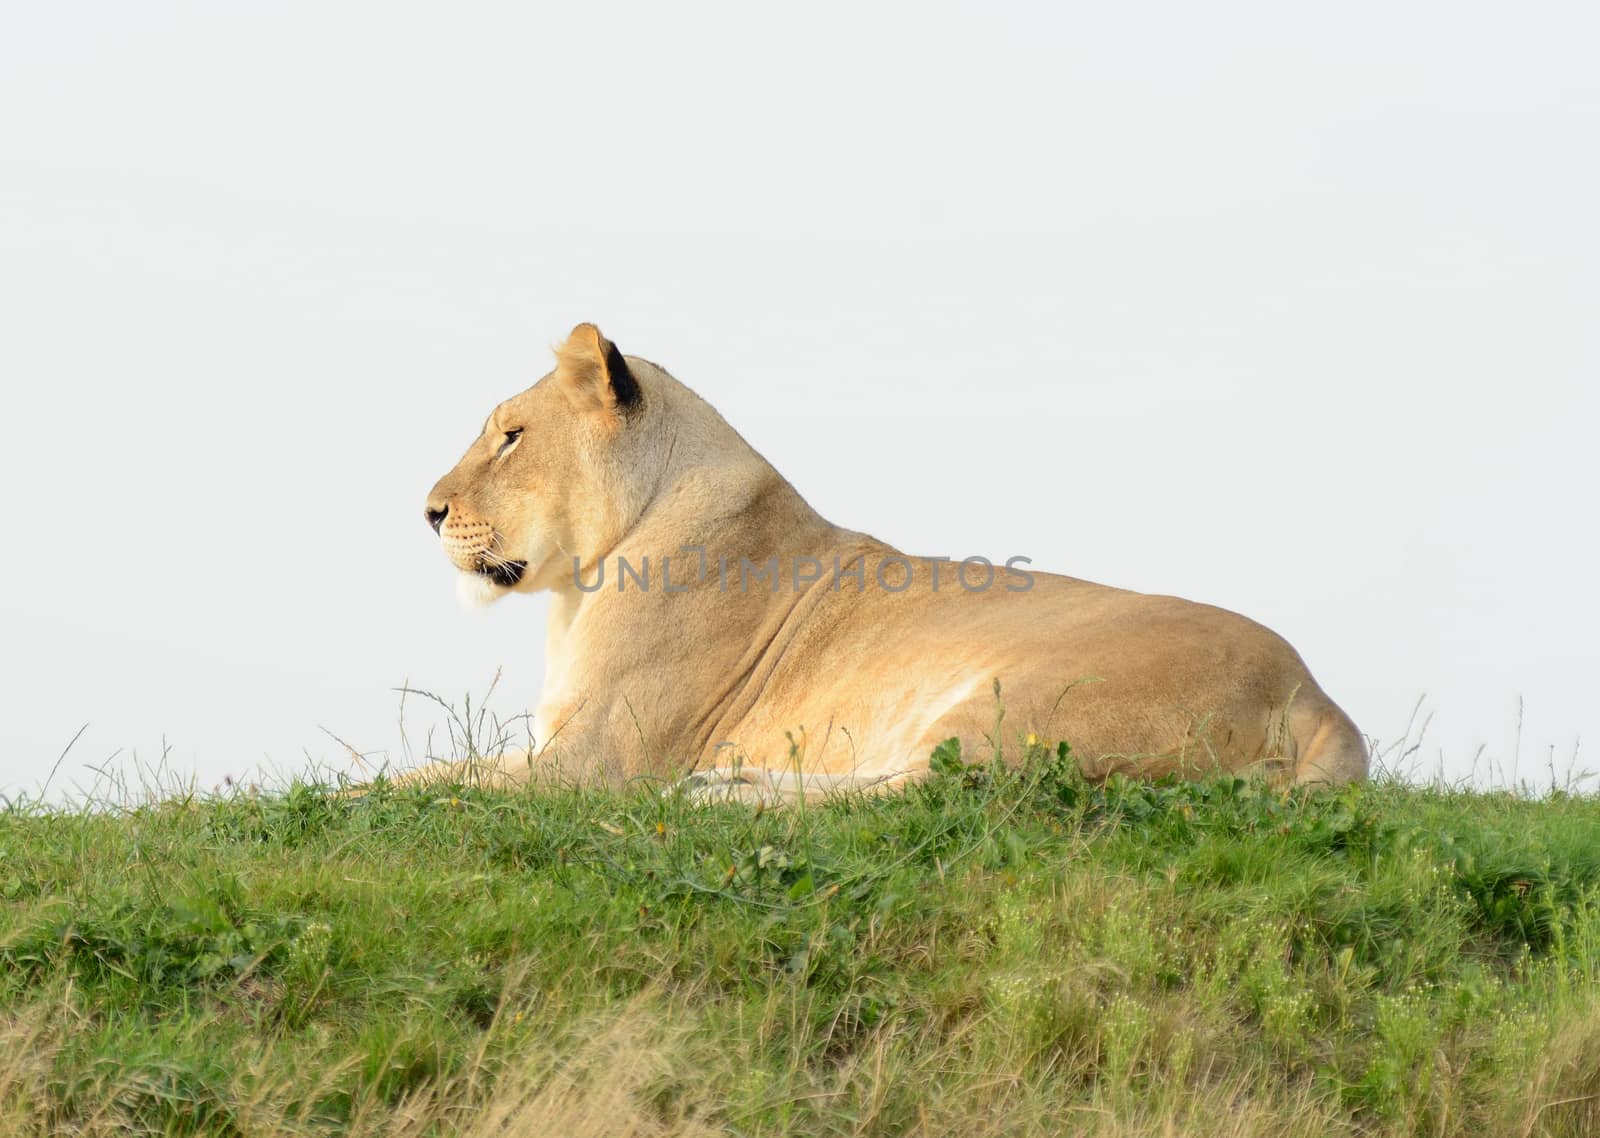 Lioness On Hill by kmwphotography